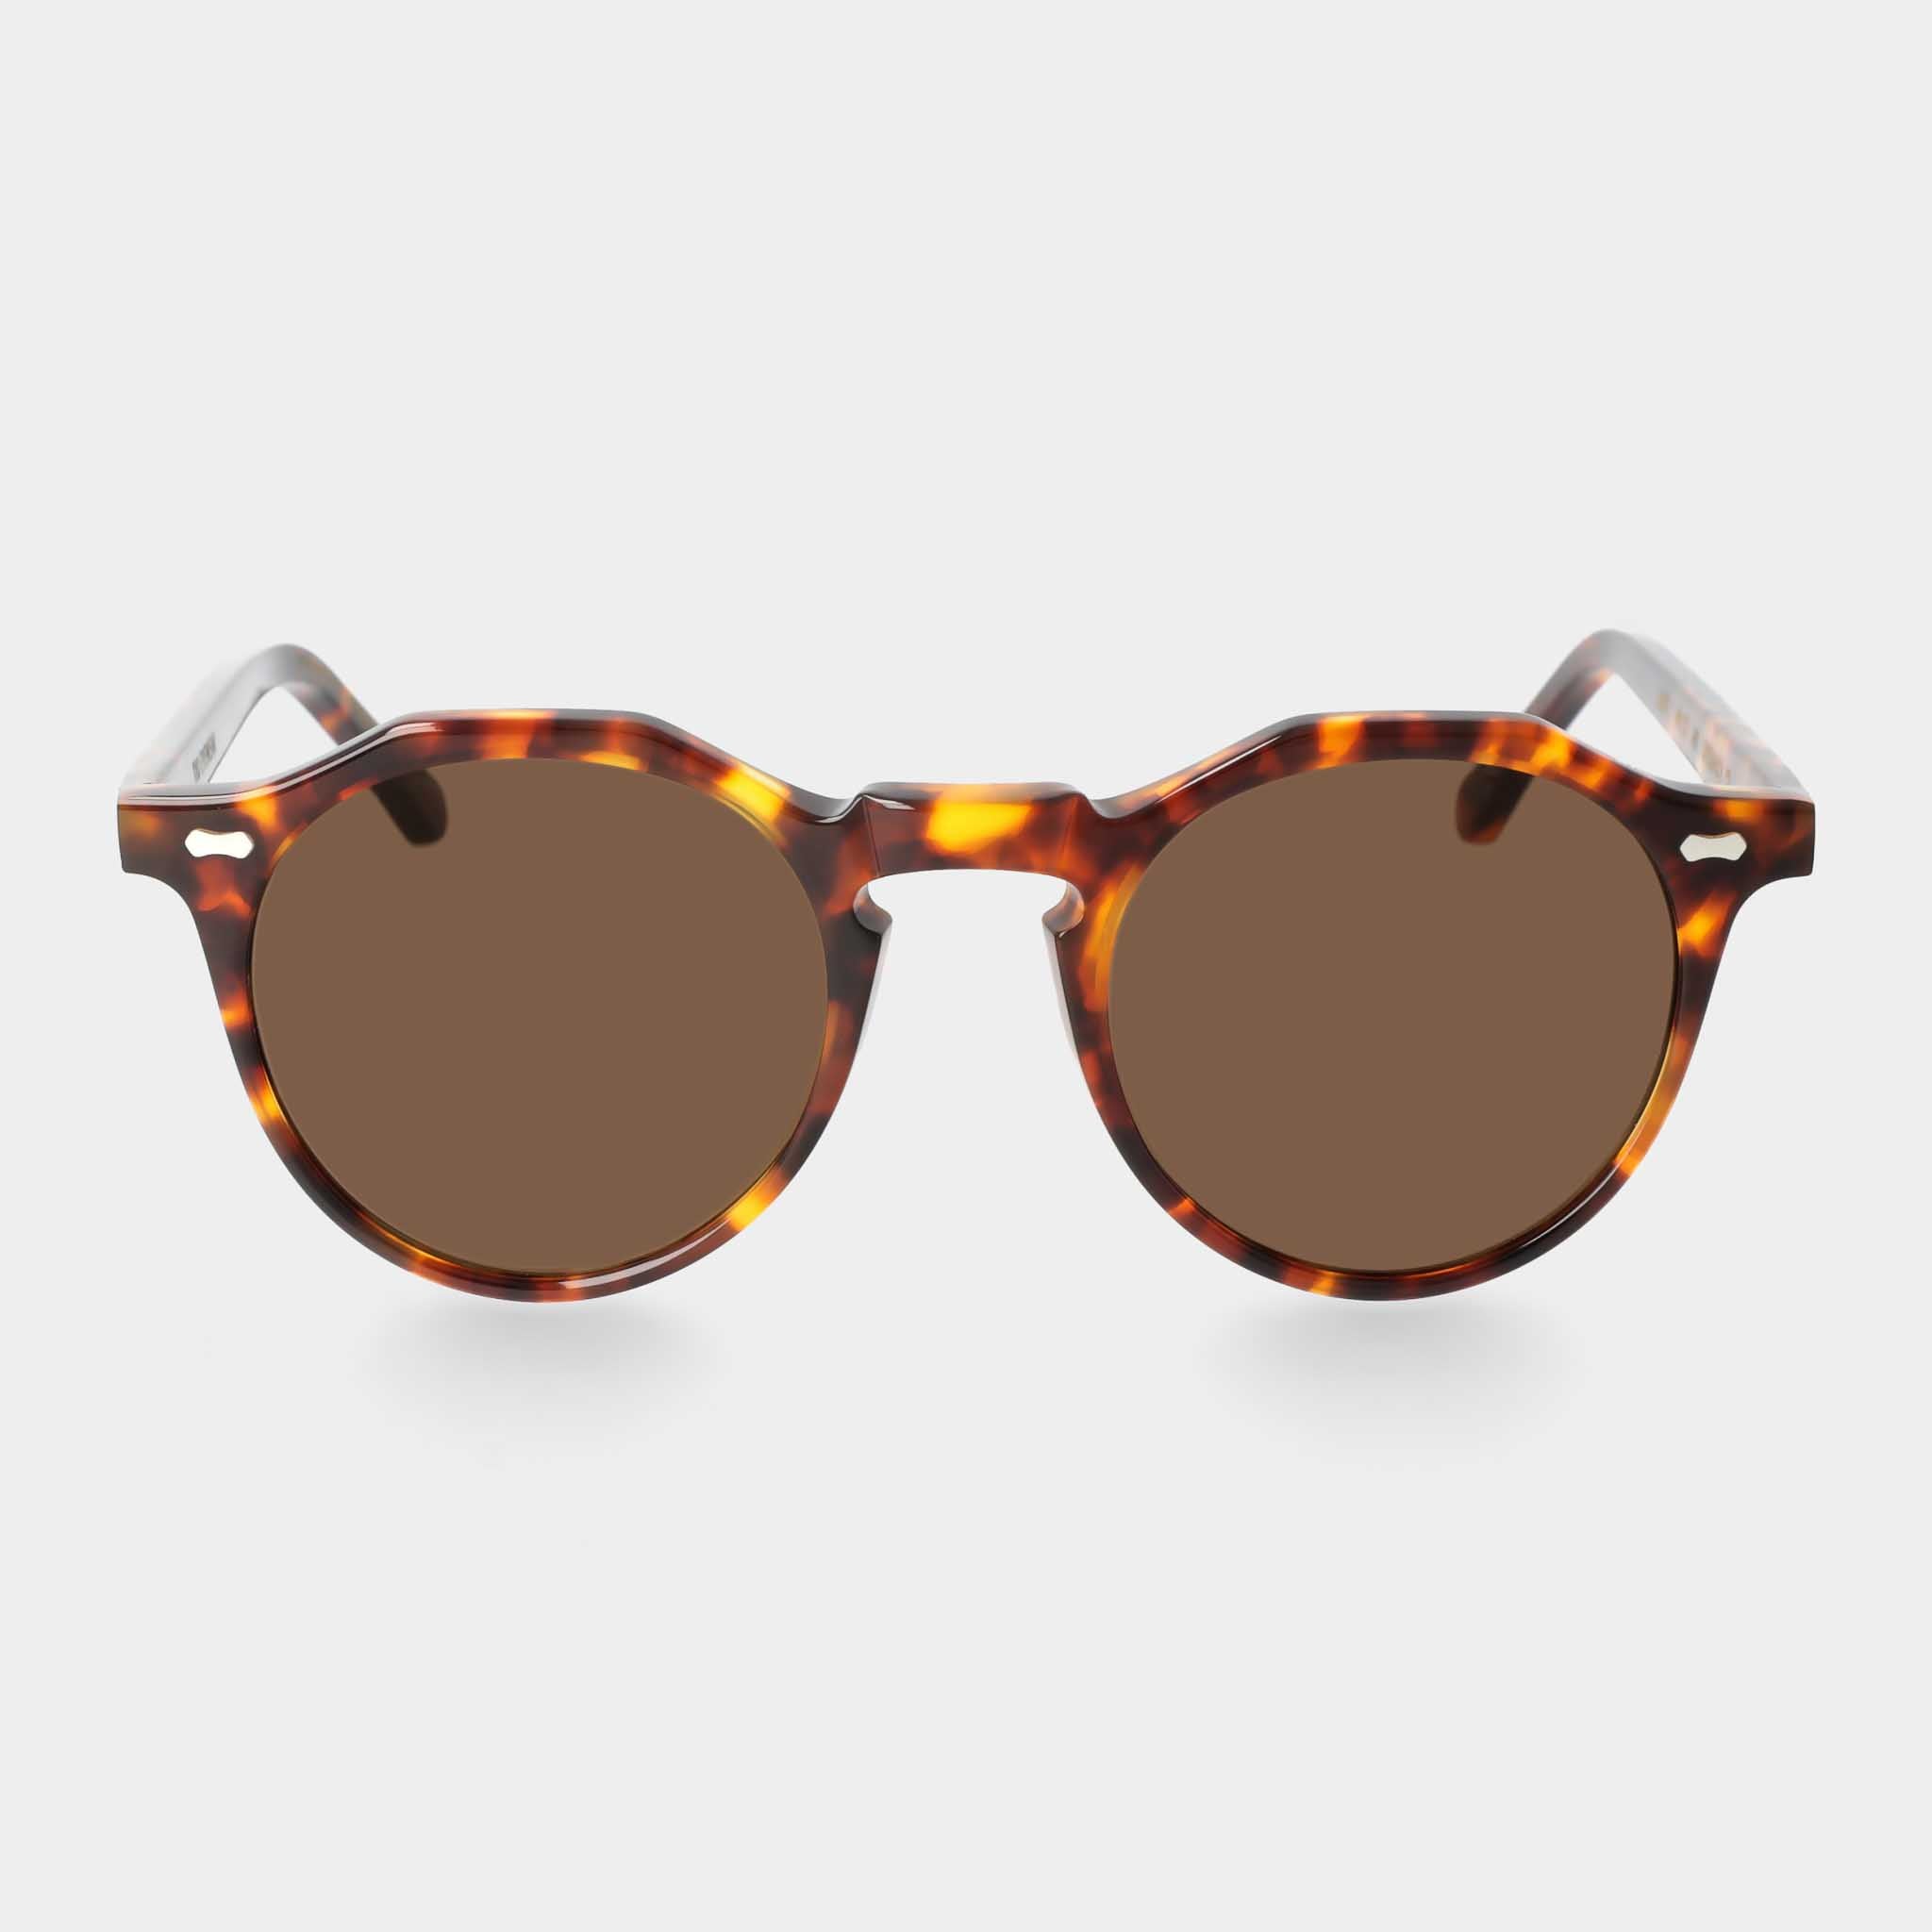 sunglasses-lapel-eco-spotted-havana-tobacco-sustainable-tbd-eyewear-front